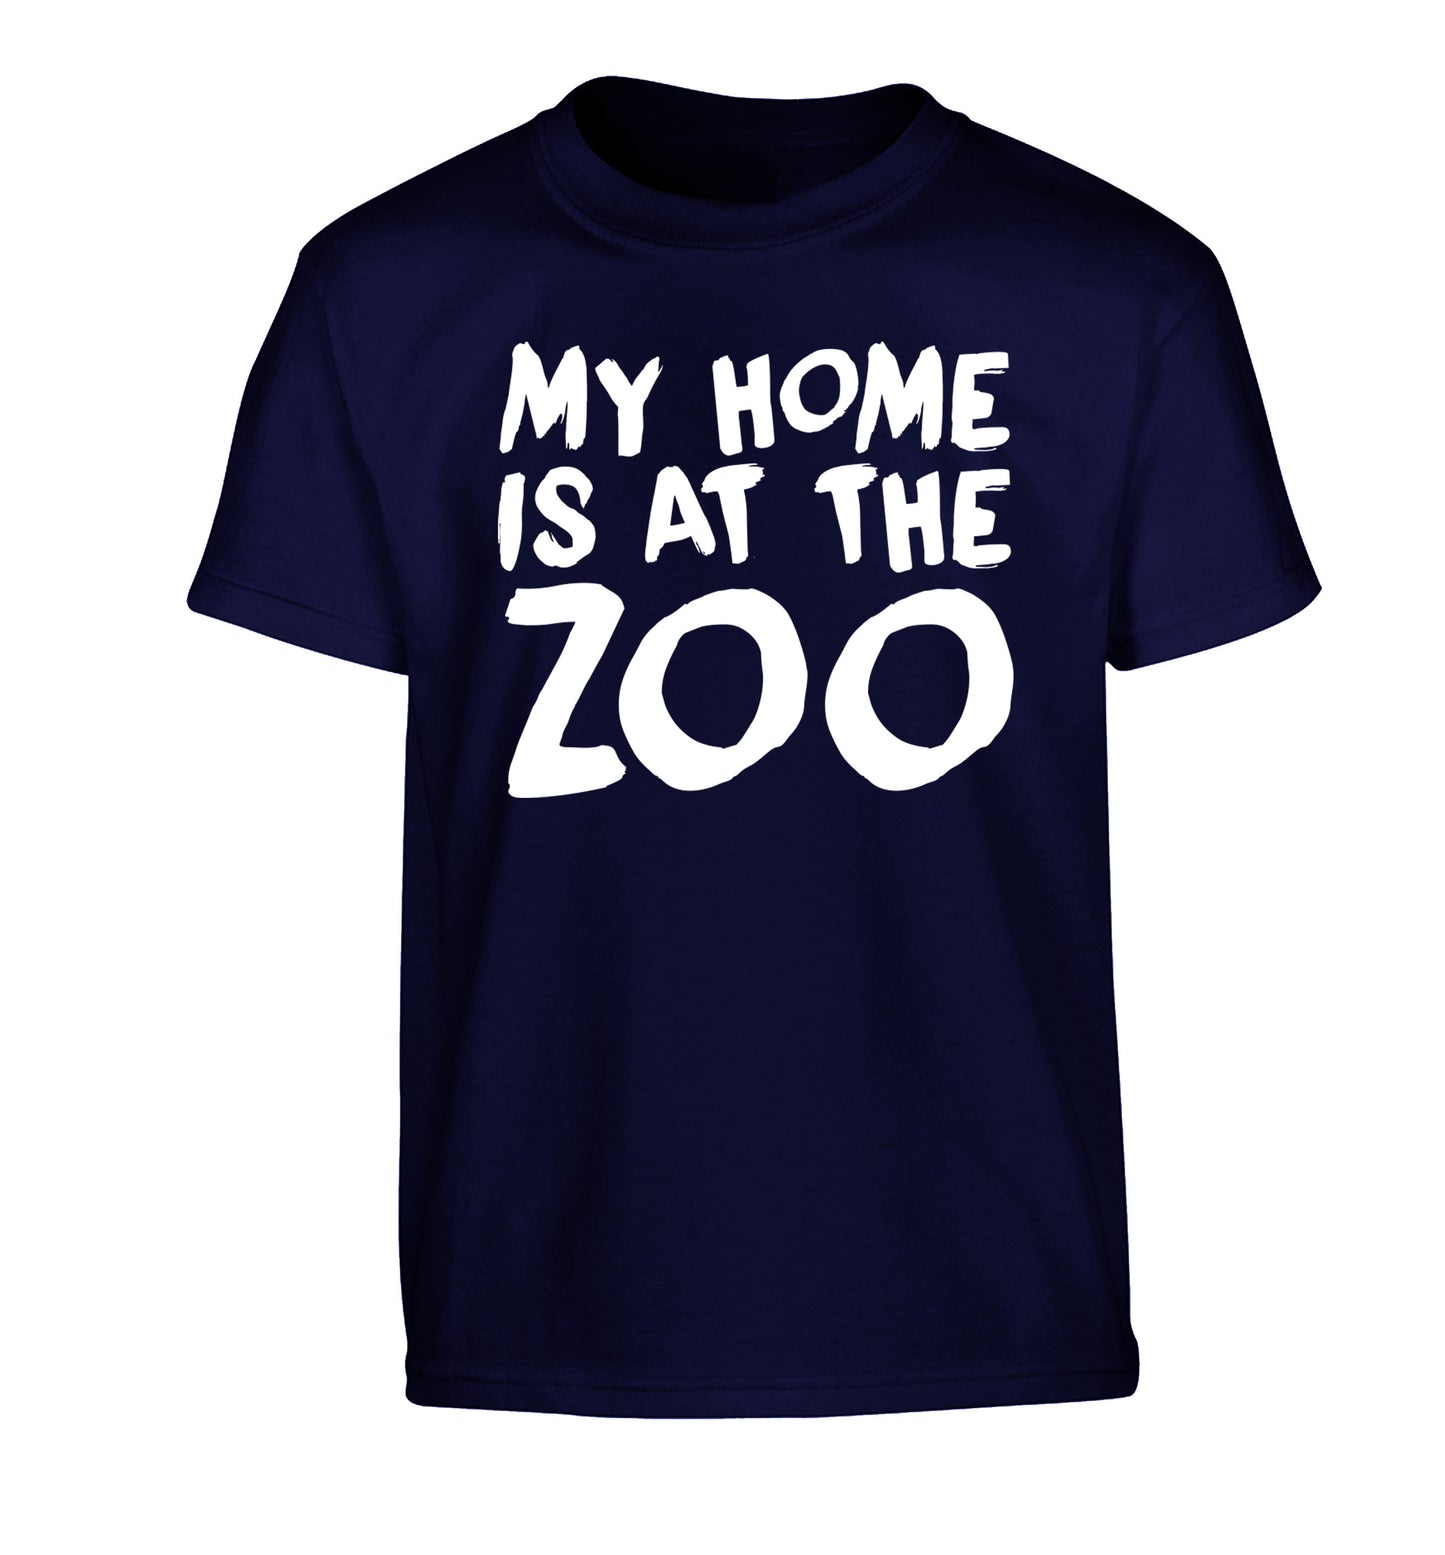 My home is at the zoo Children's navy Tshirt 12-14 Years